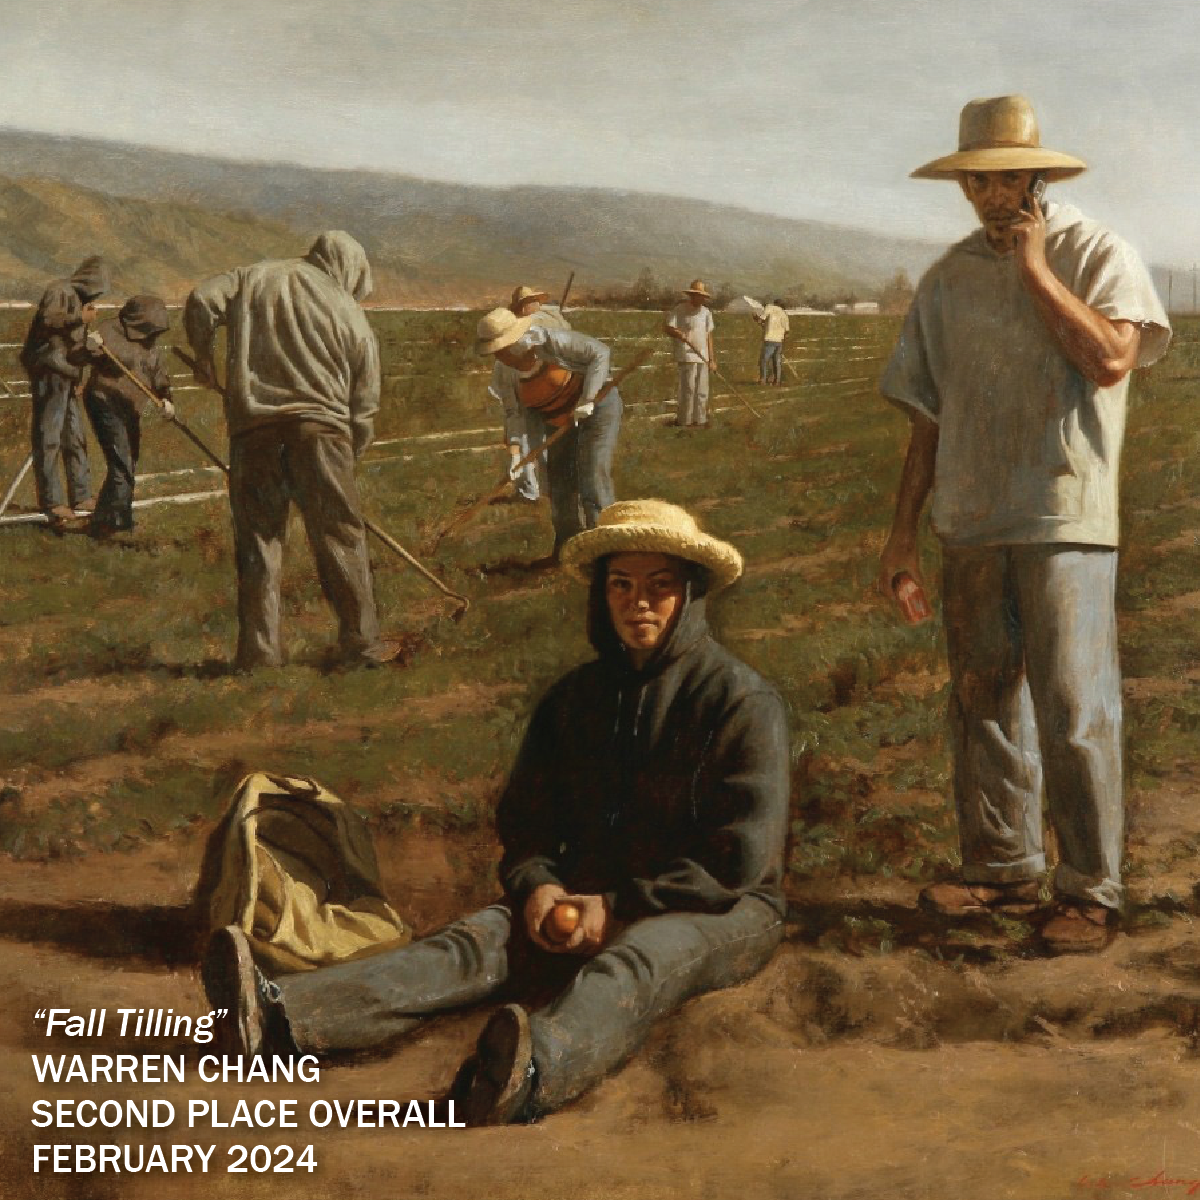 landscape painting of migrant workers resting in field second place overall winner February 2024 warren chang